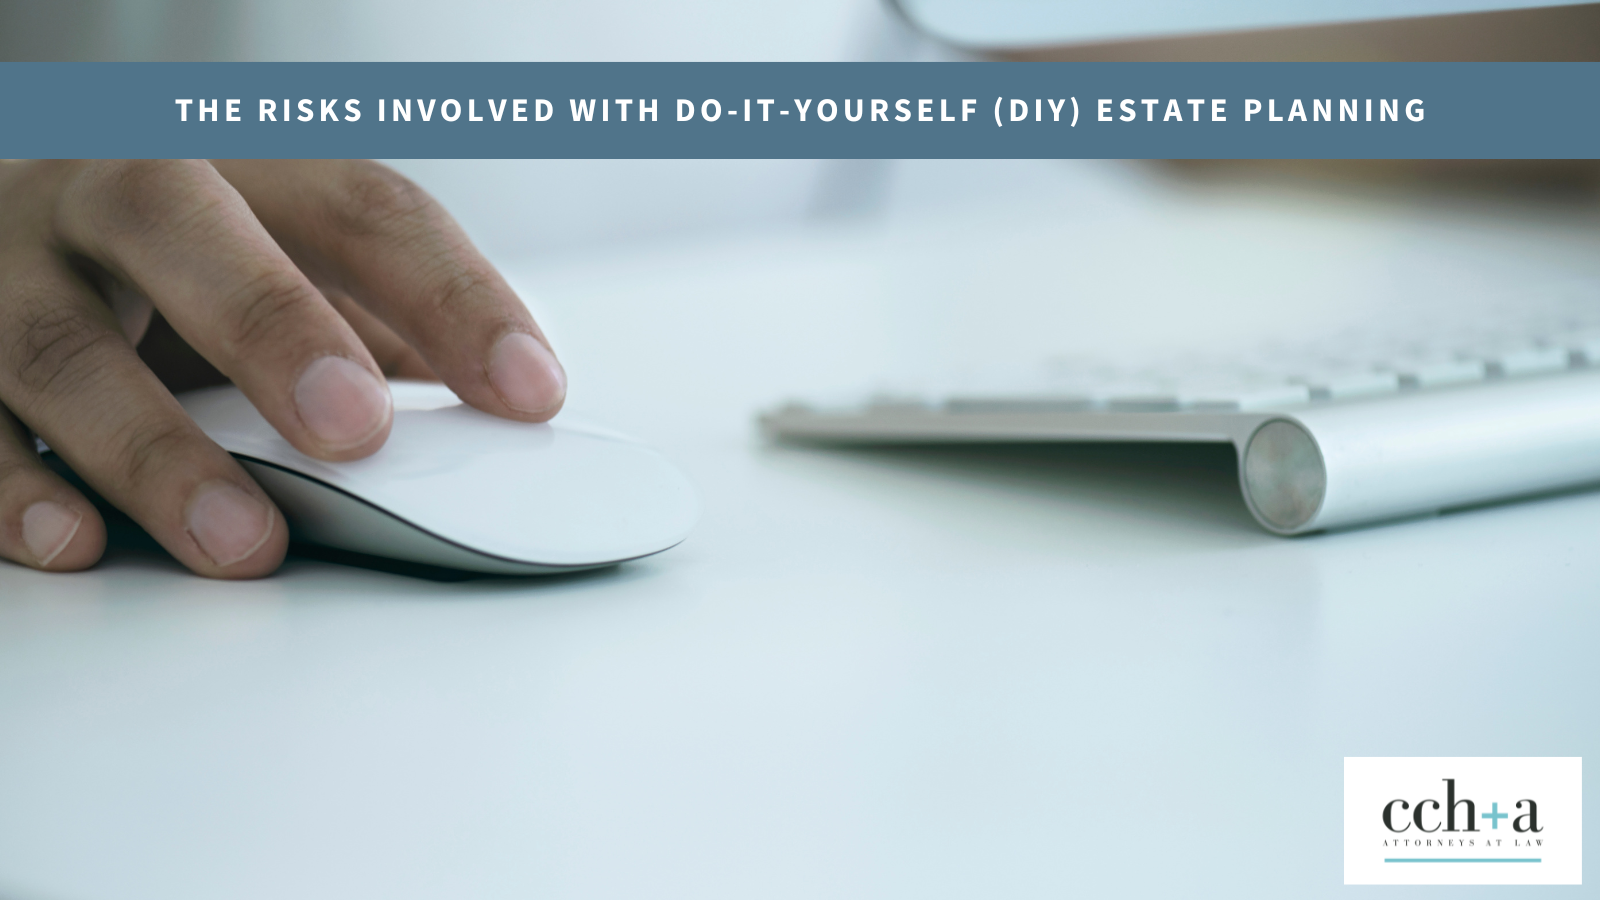 CCHA The Risks Involved With Do it yourself diy Estate Planning blog image